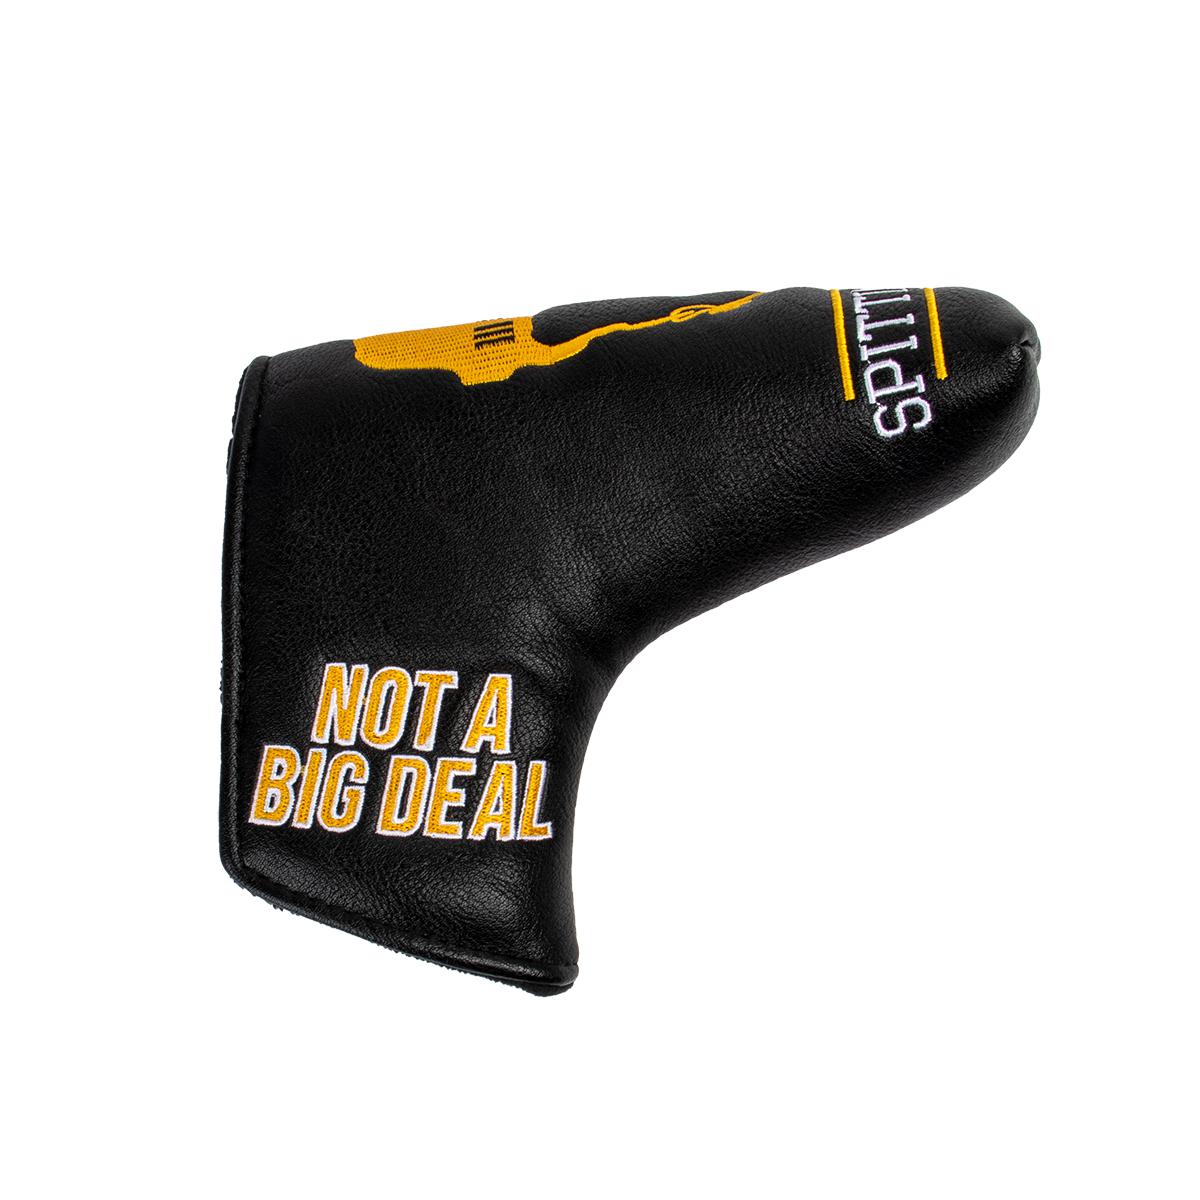 Spittin Chiclets Blade Putter Cover-Golf Accessories-Spittin Chiclets-Black-One Size-Barstool Sports